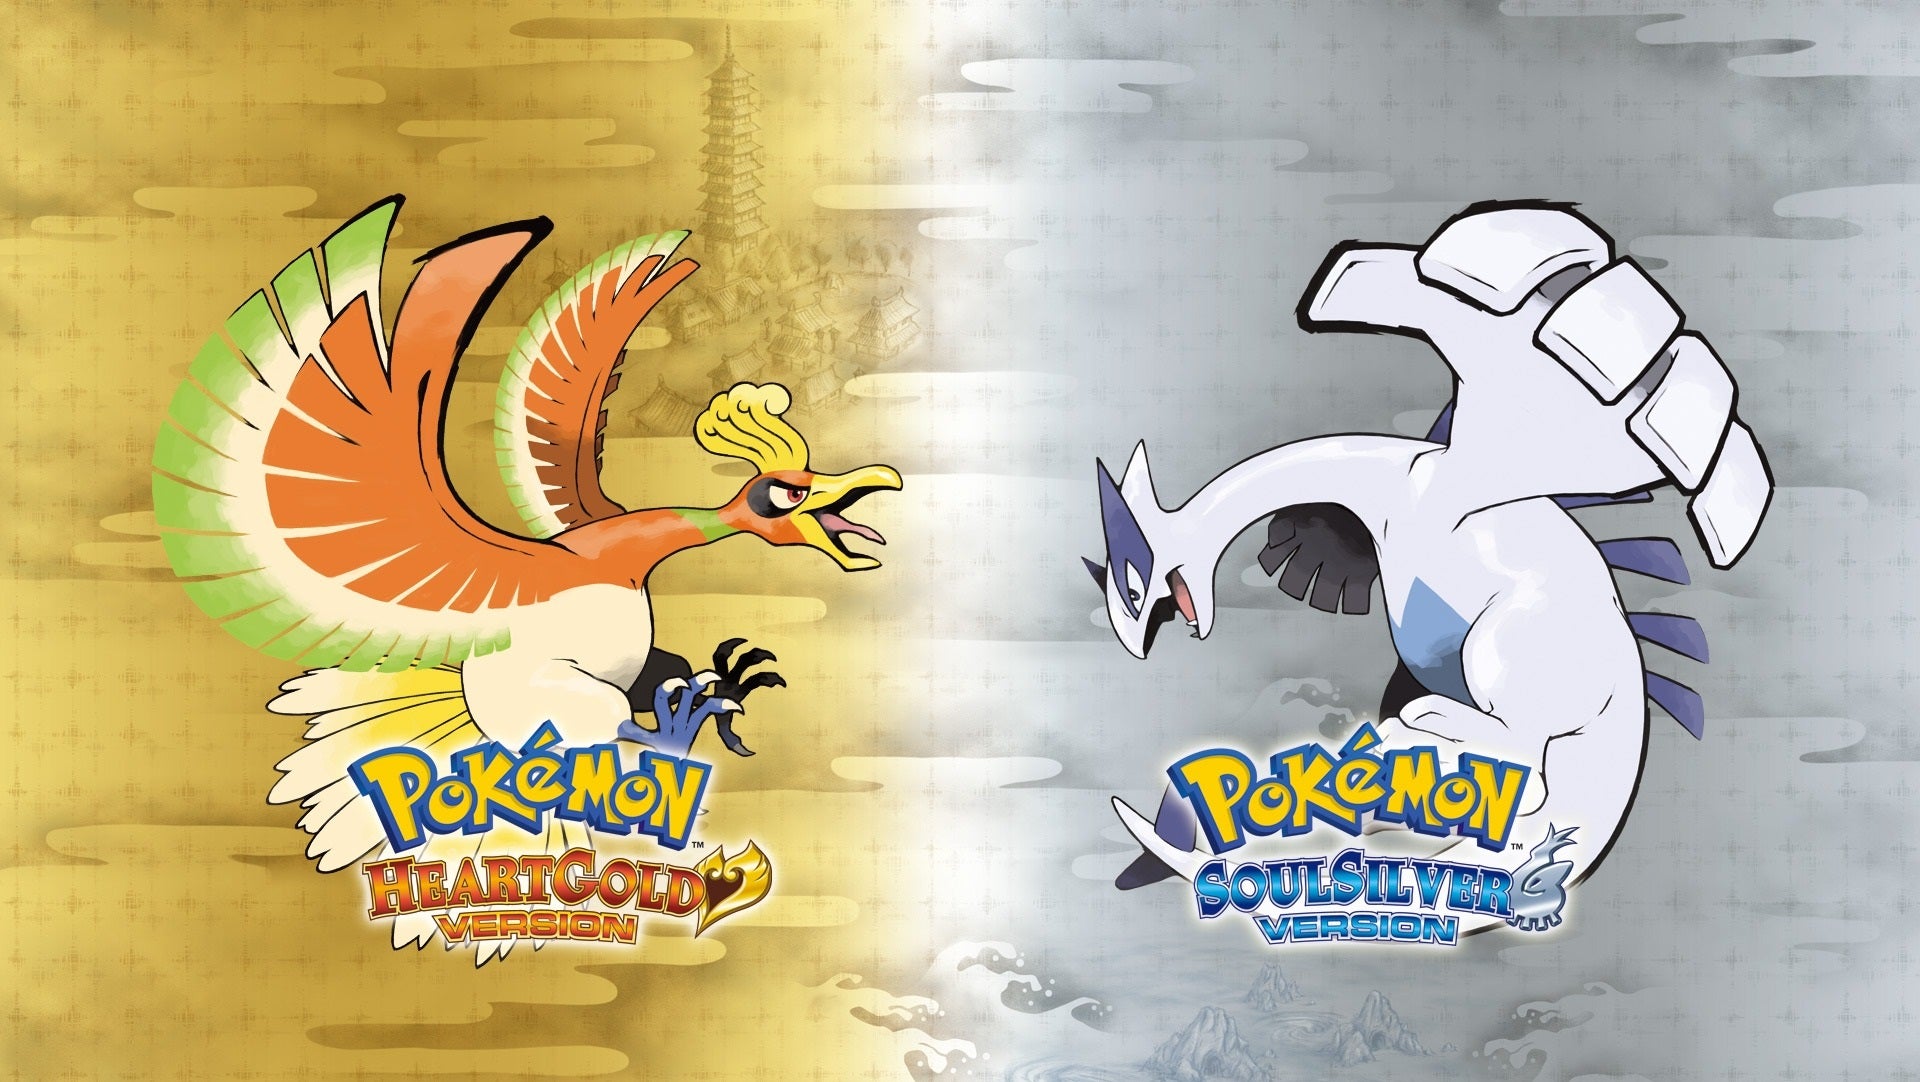 The Gold and Silver remakes perfected the originals' ambitious endgame. (Image: The Pokémon Company)